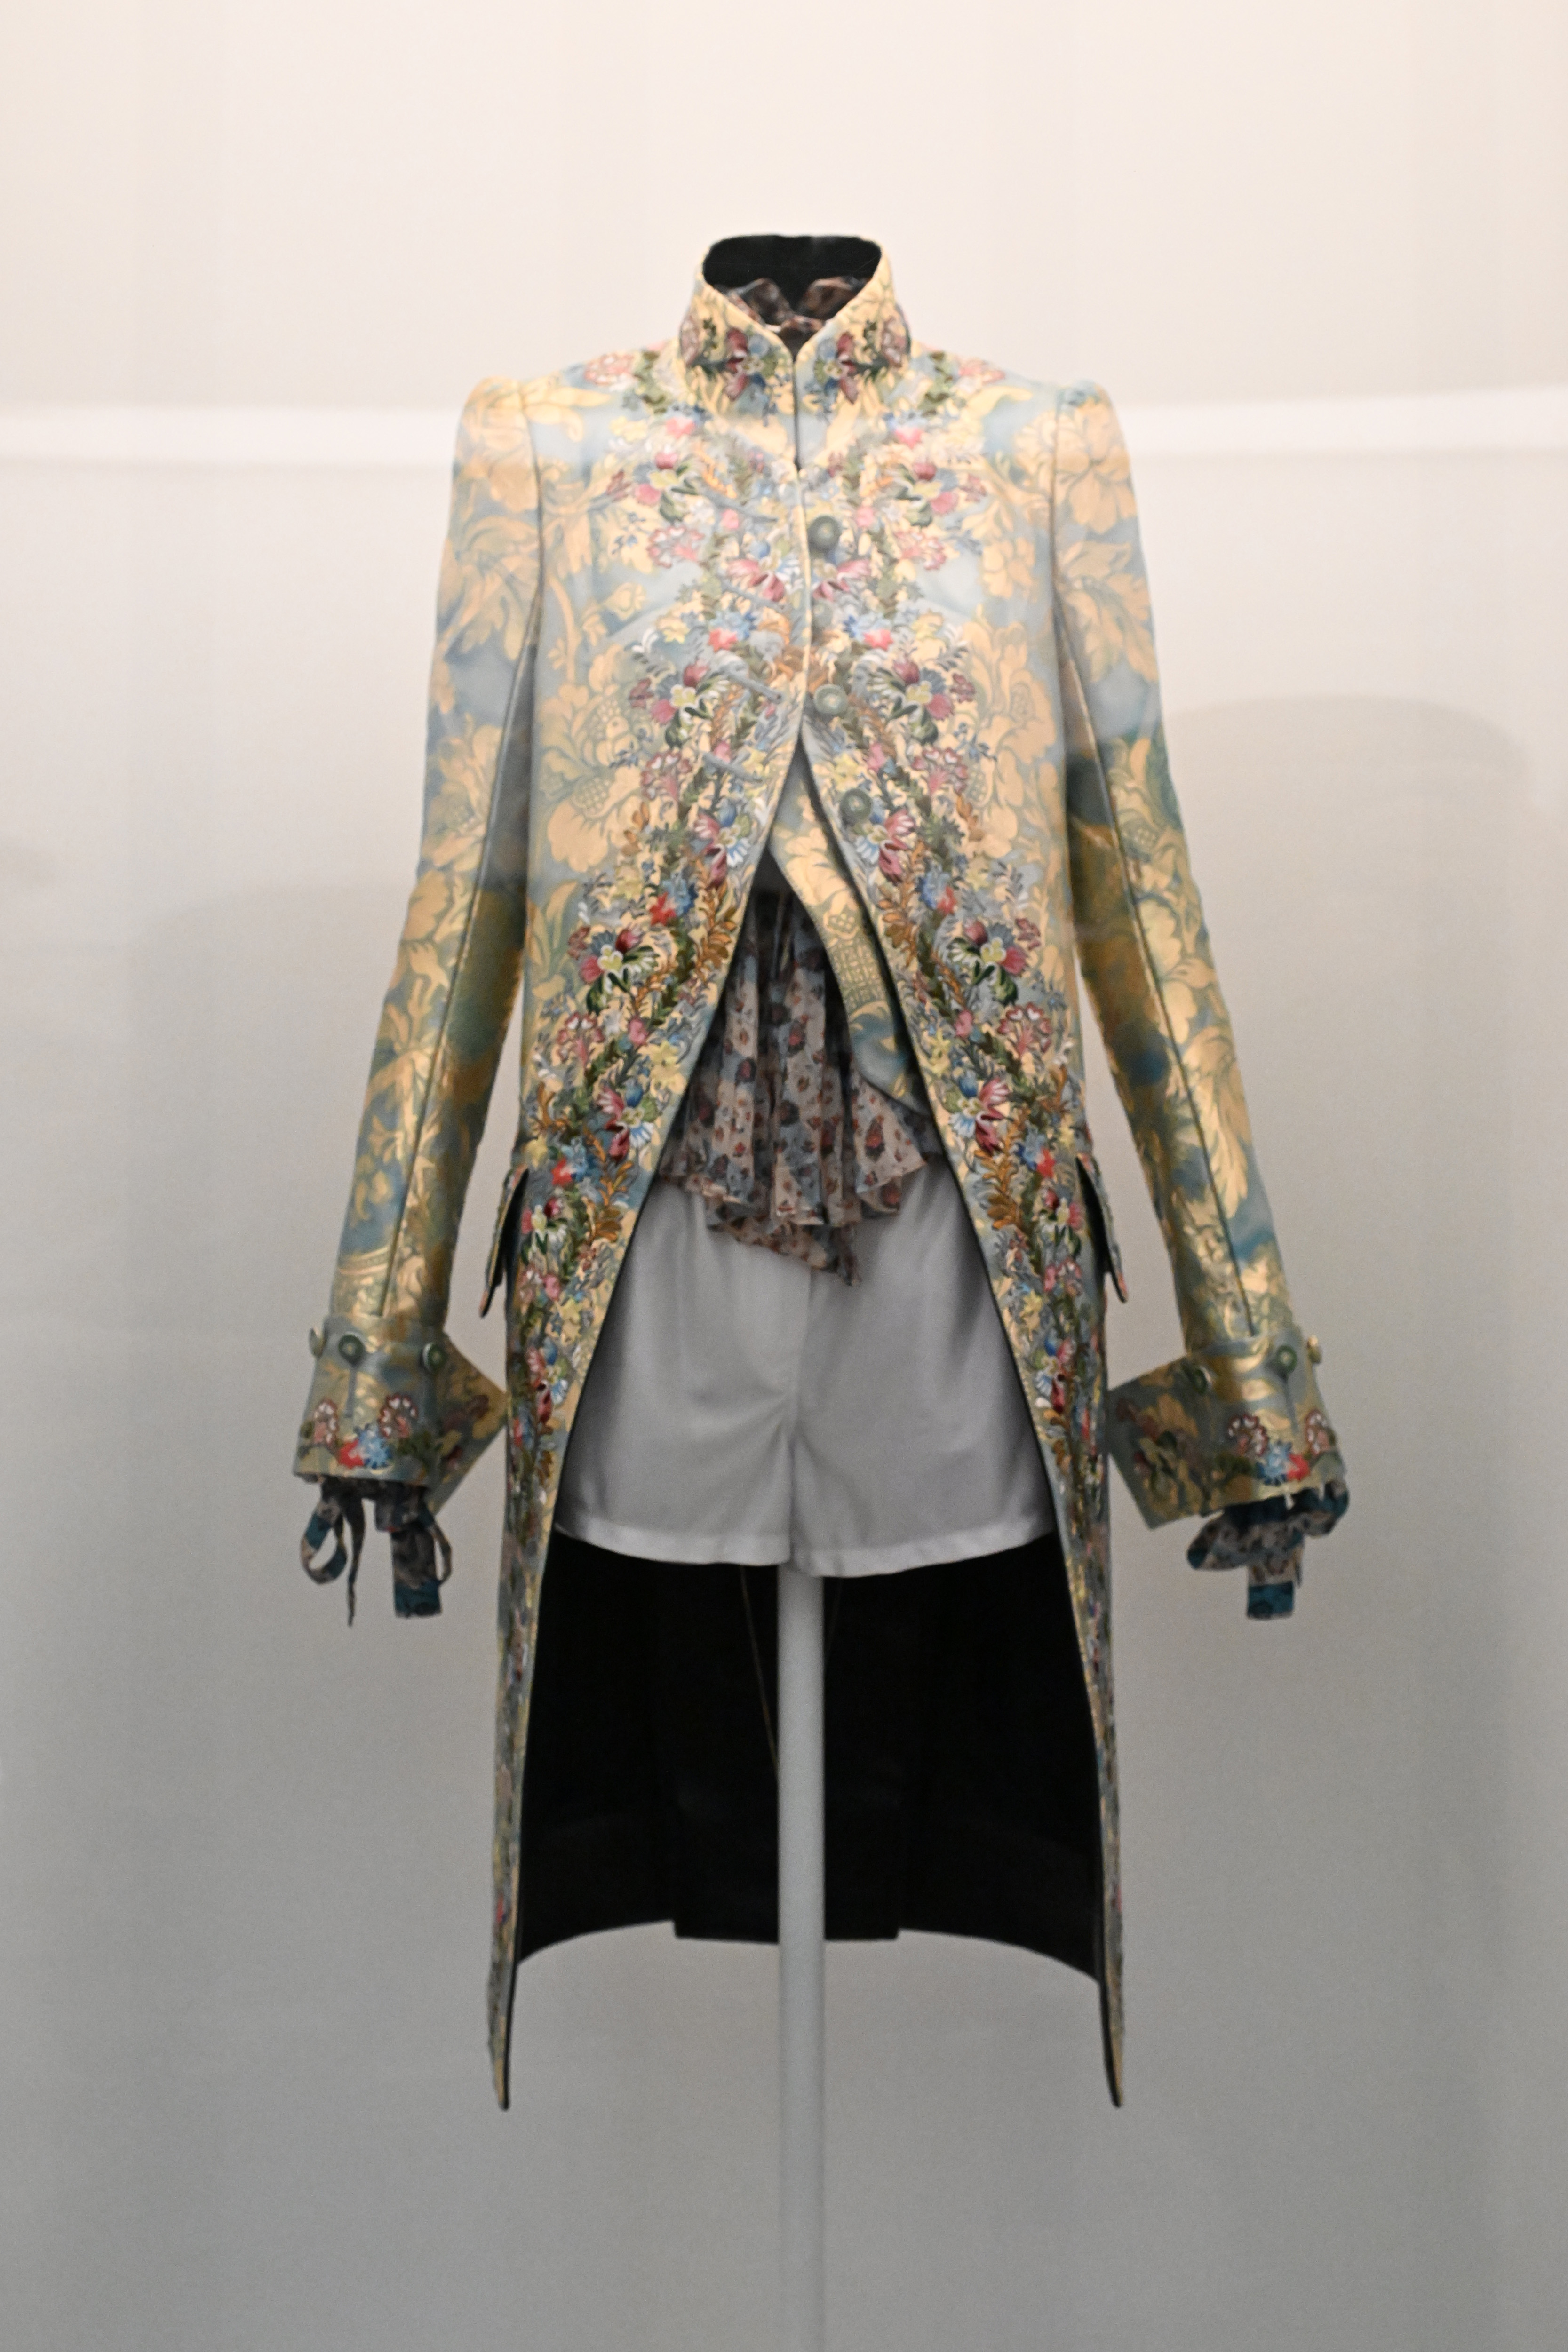 Elaborate floral embroidered coat displayed on a mannequin with a black skirt and white blouse